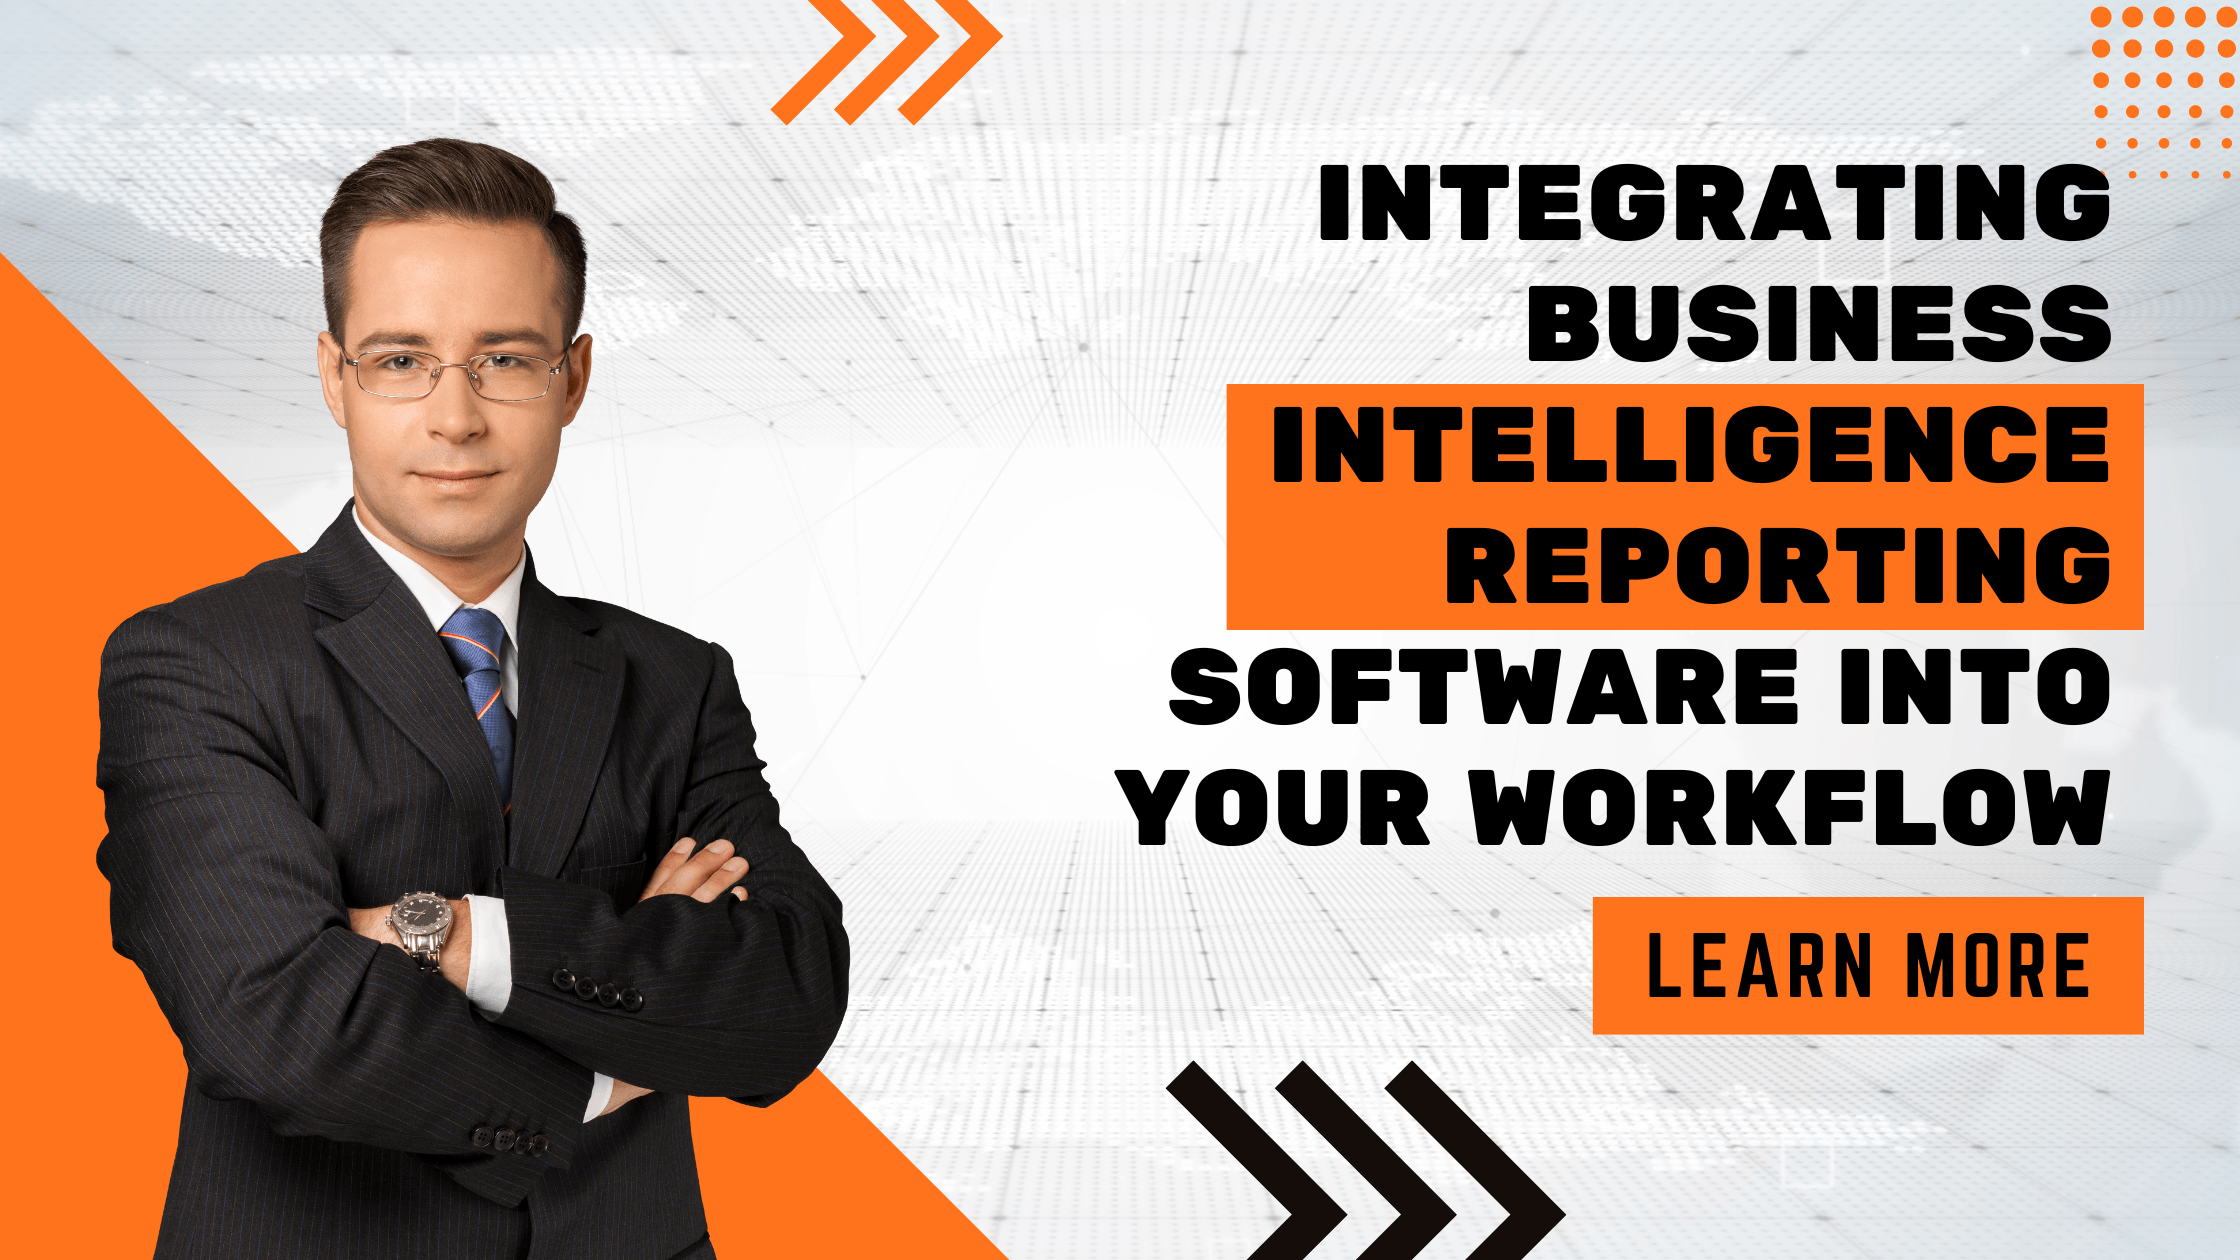 Integrating Business Intelligence Reporting Software into Your Workflow